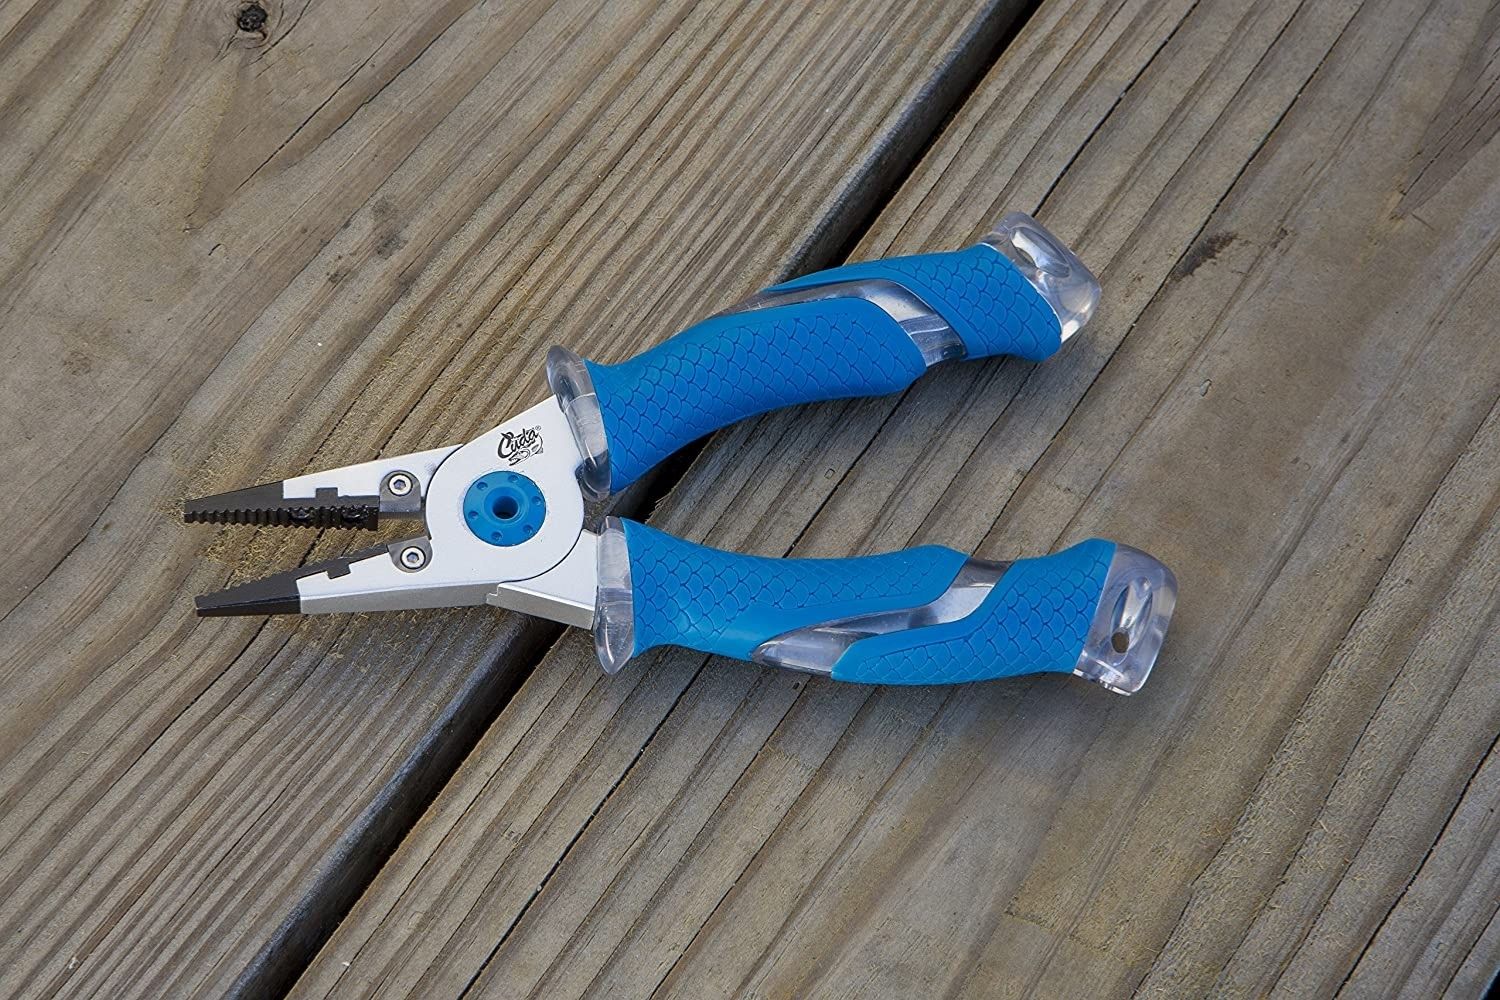 The Best Fishing Pliers for Unhooking Your Catch - Bob Vila